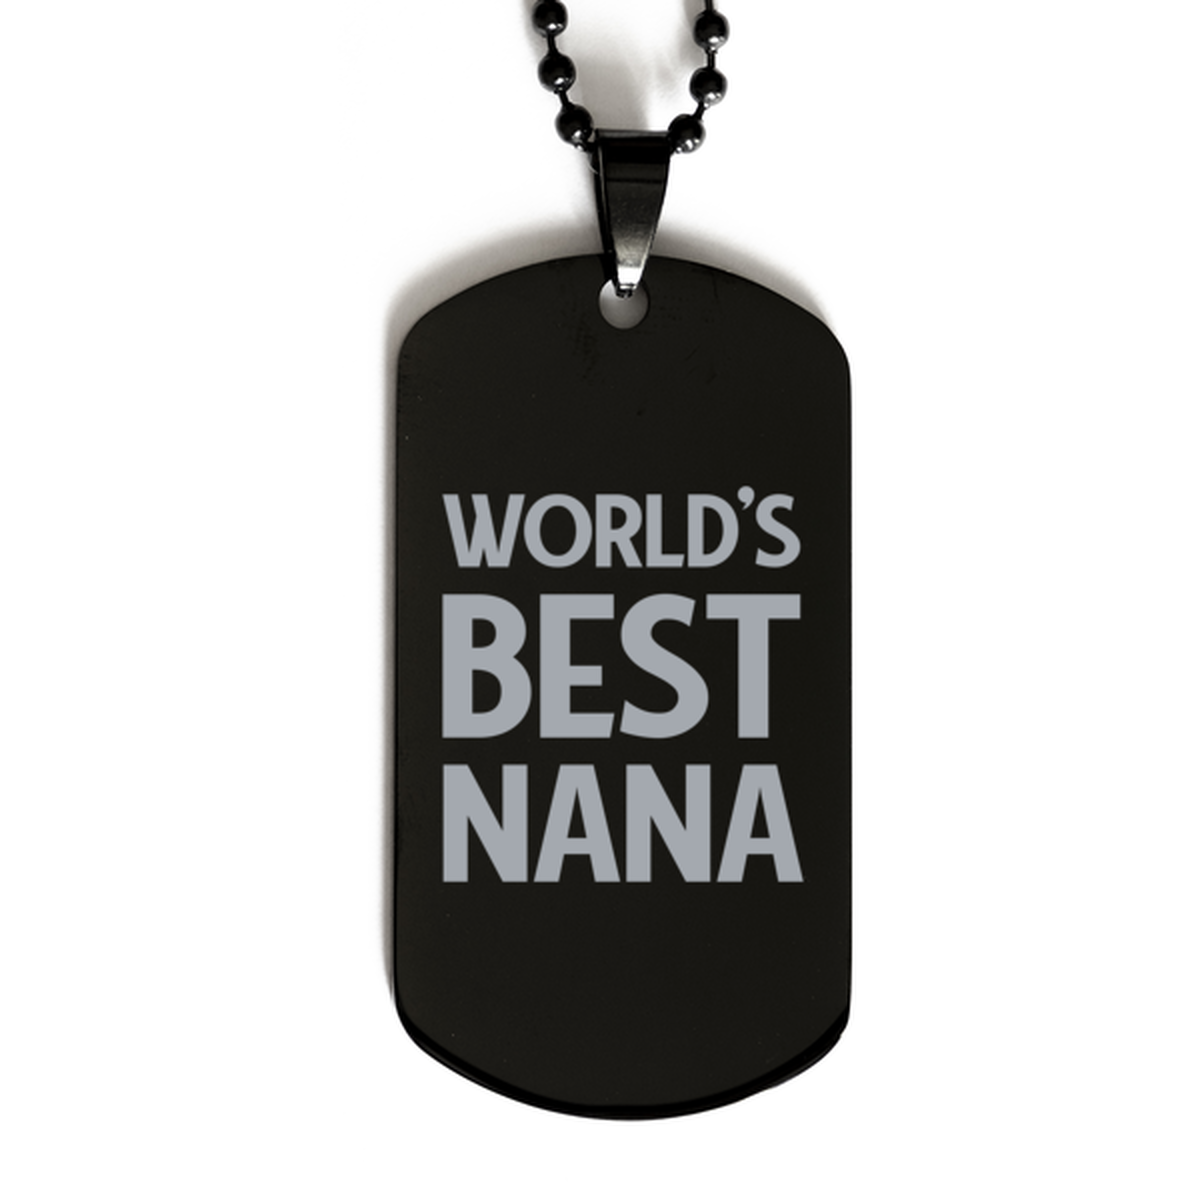 Worlds Best Nana Gifts, Funny Black Engraved Dog Tag For Nana, Birthday Presents For Women